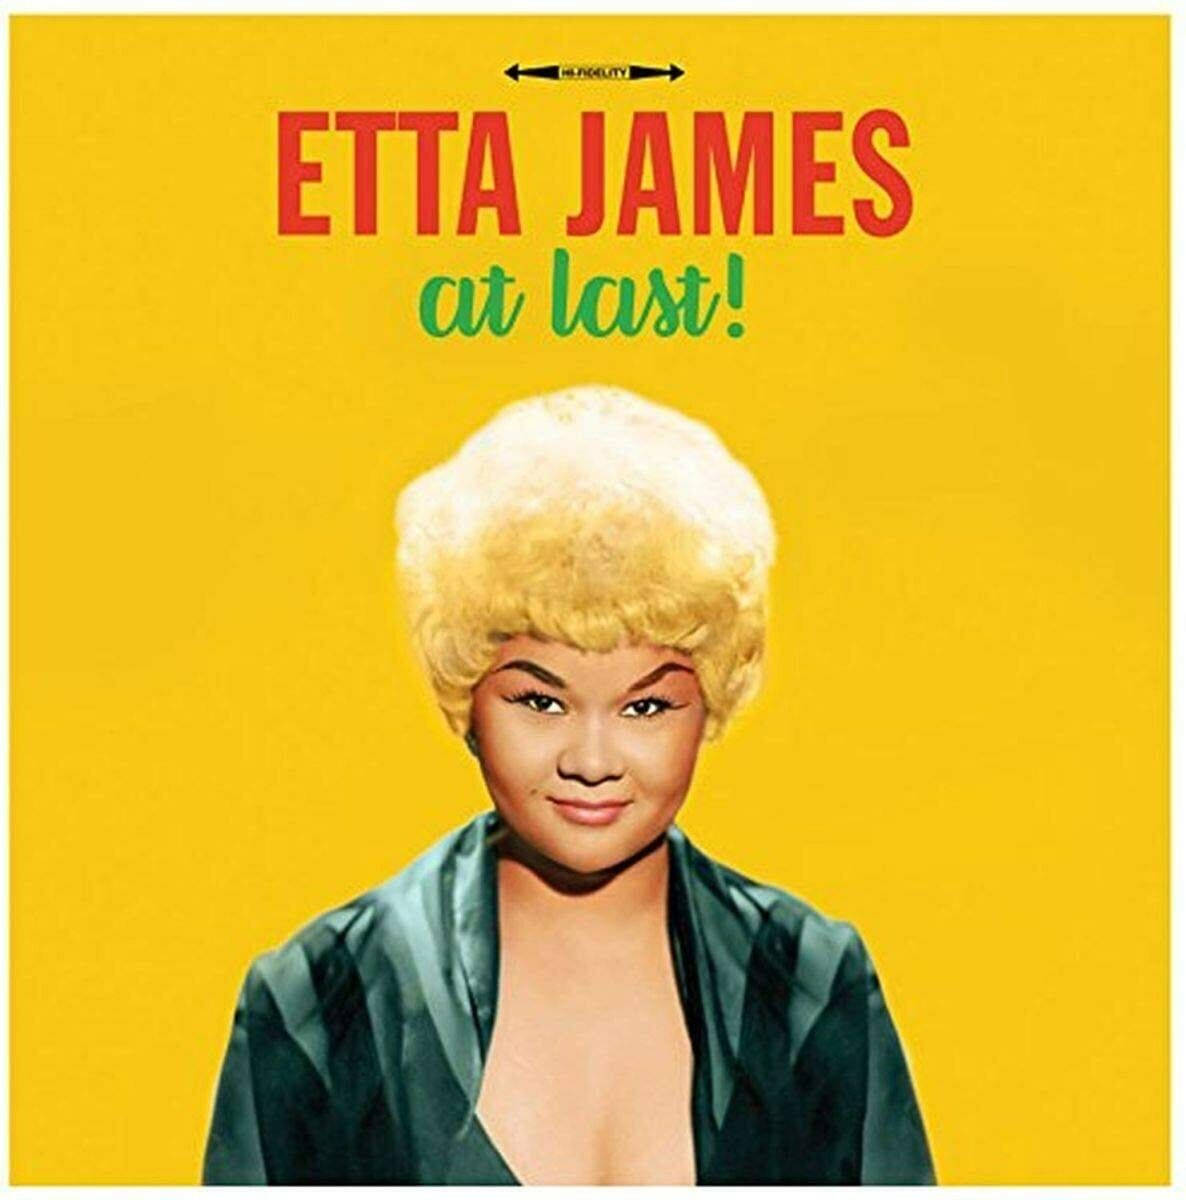 Etta James Performing Iconic Song 'At Last' Wallpaper